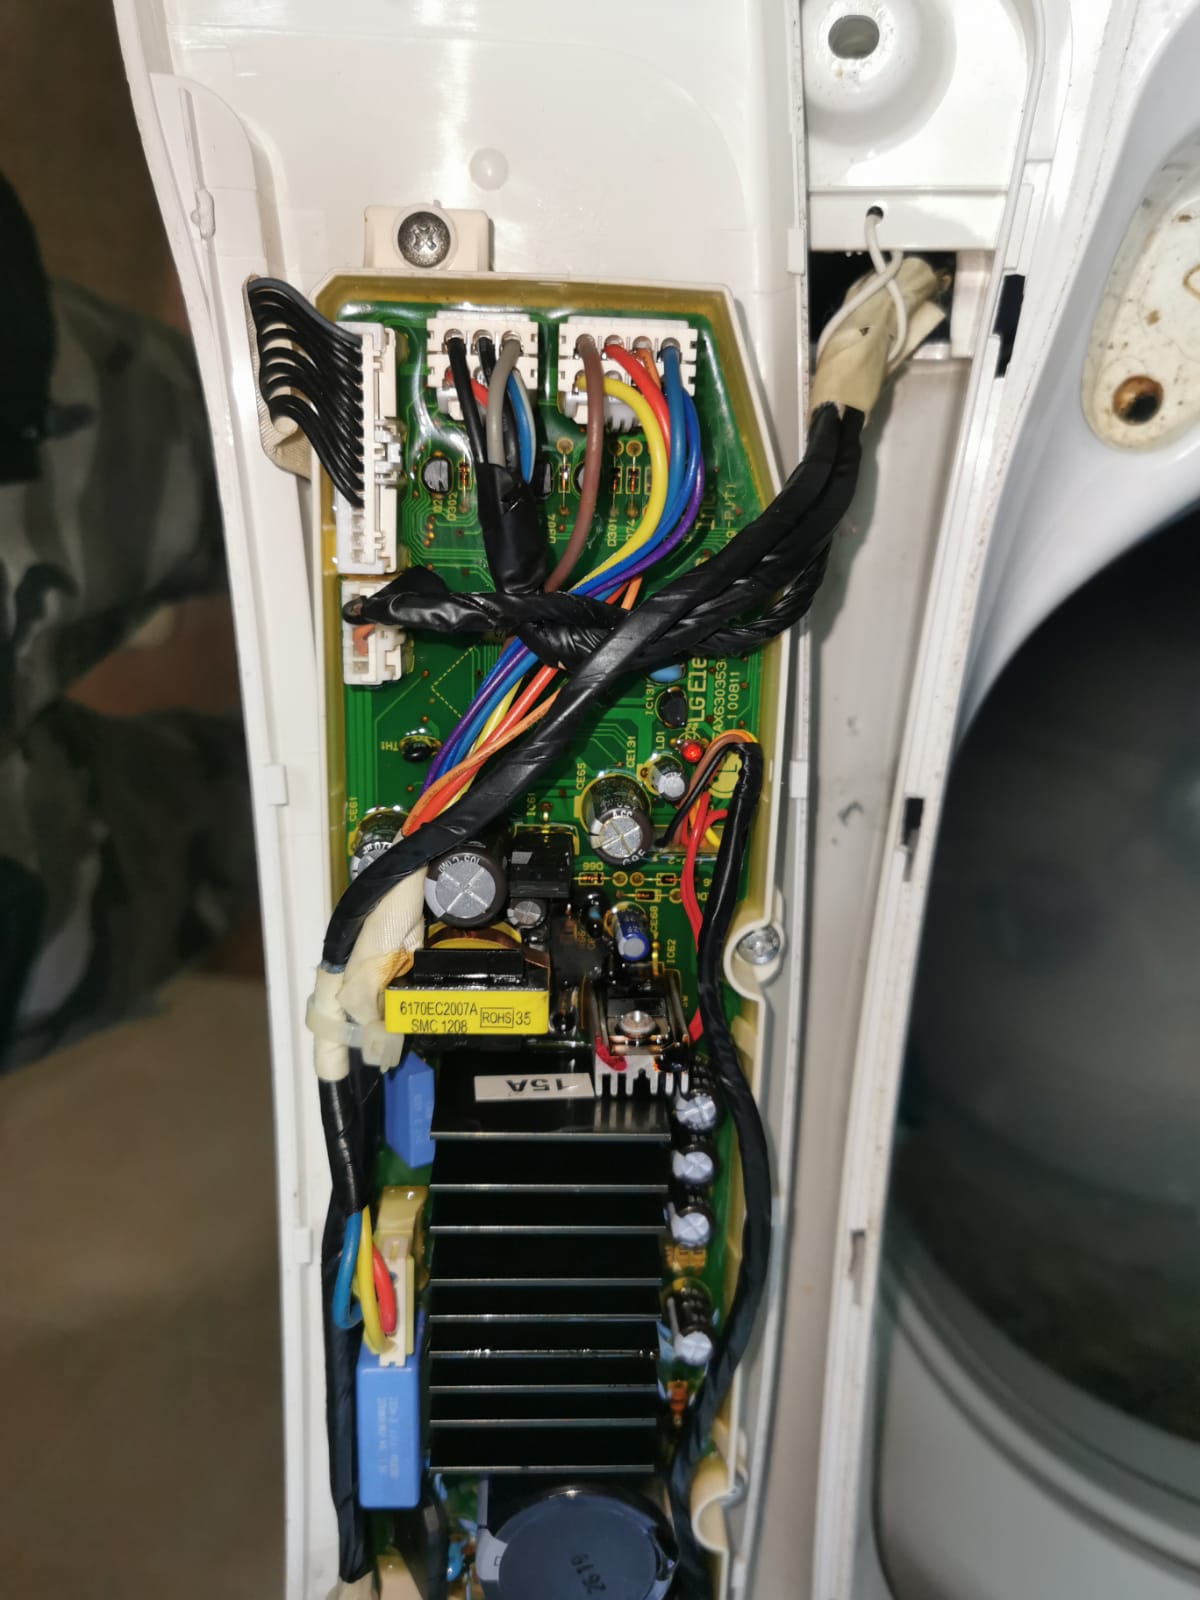 Washing Machine Checking For Control Panel Issue 9